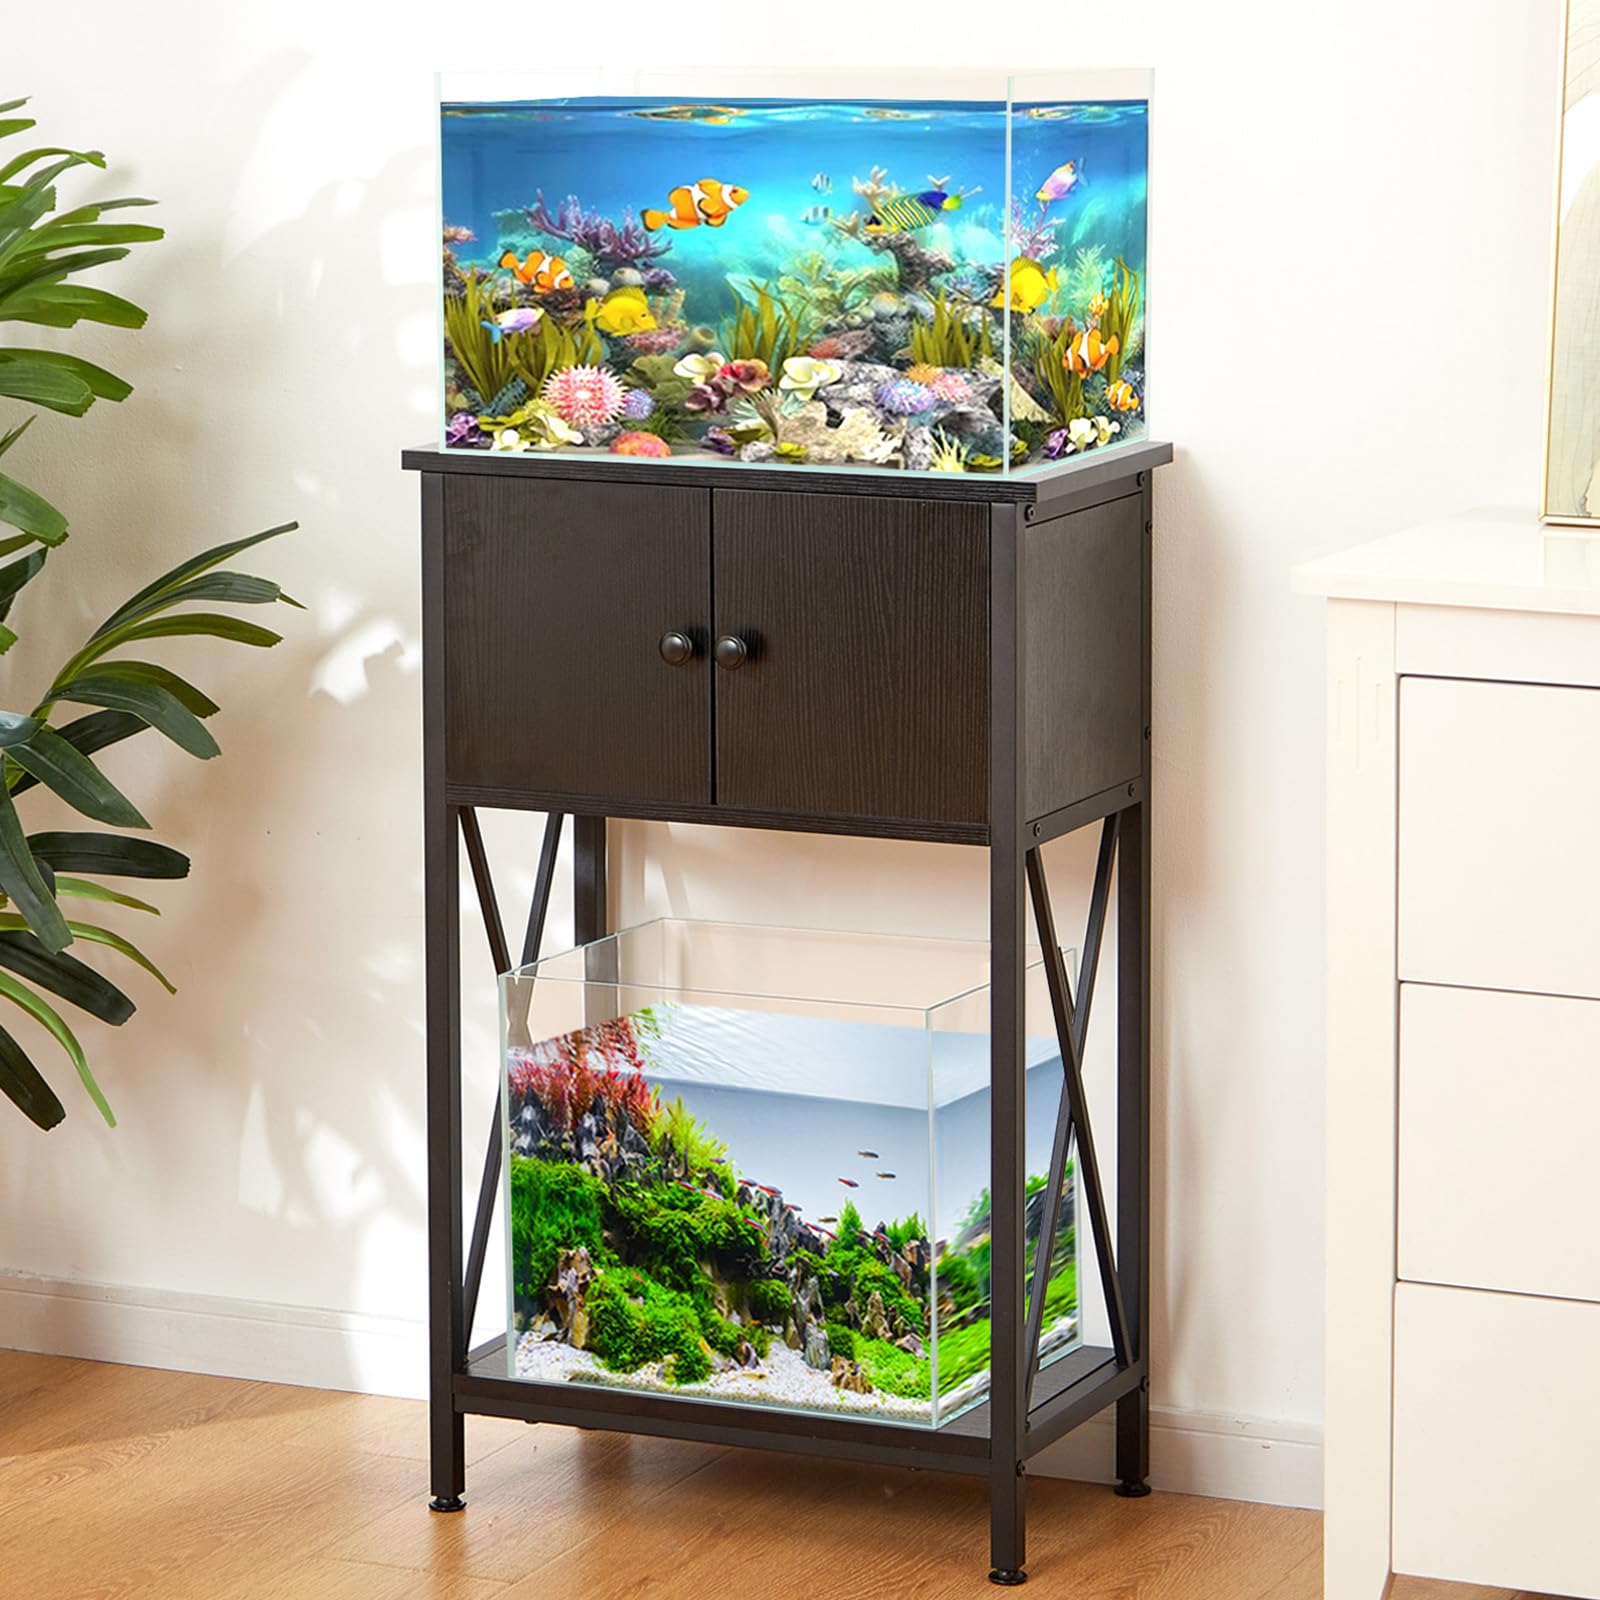 LAQUAL 10 Gallon Fish Tank Stand with Cabinet - Black